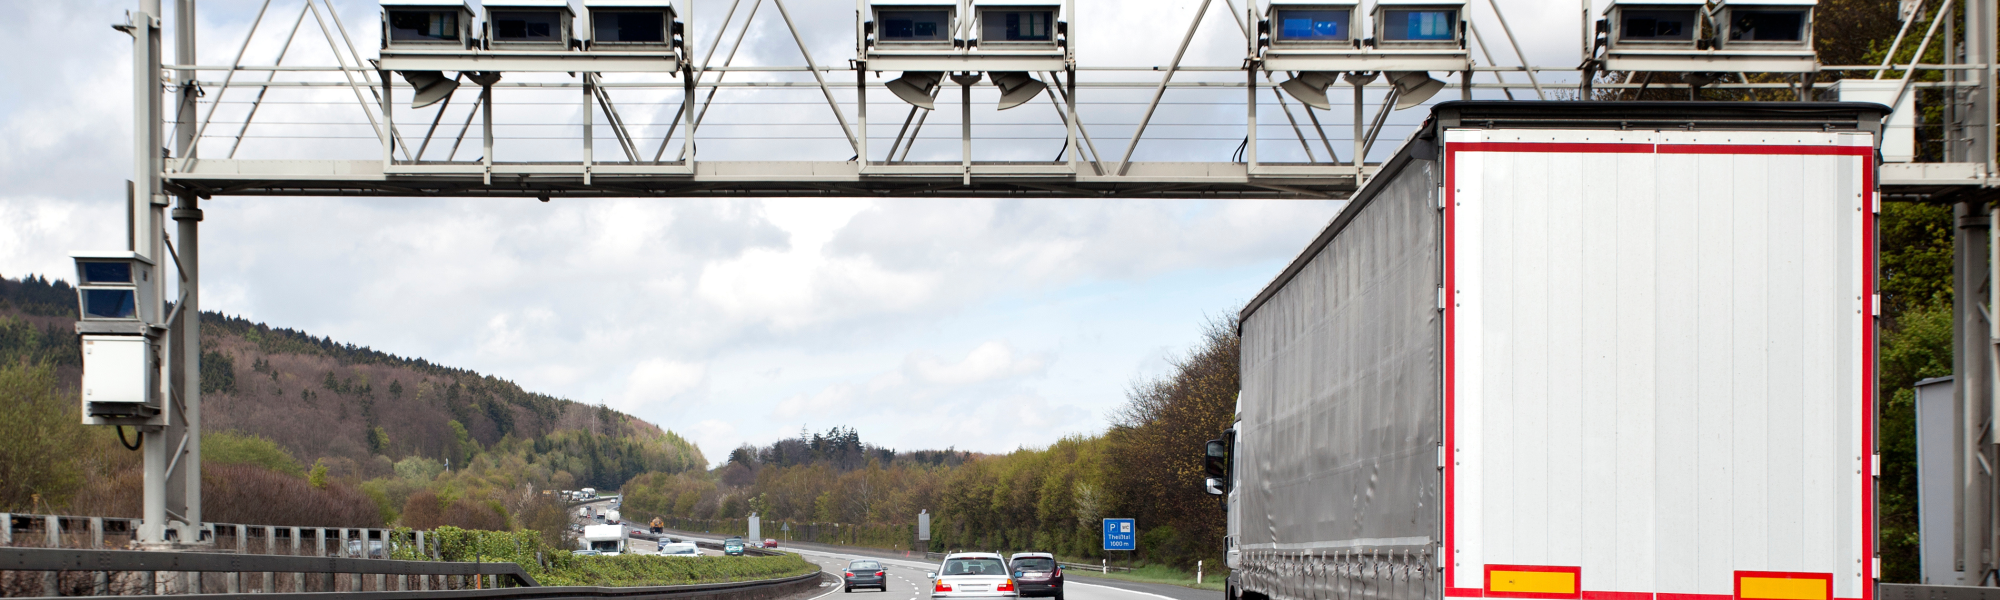 EU countries have started implementing the bloc’s new truck tolls, including new CO₂-based ones. Whether they’re new or additions to existing systems, they will have a big impact on logistics. What will those be? We asked Axxès and DKV Mobility for their perspectives.